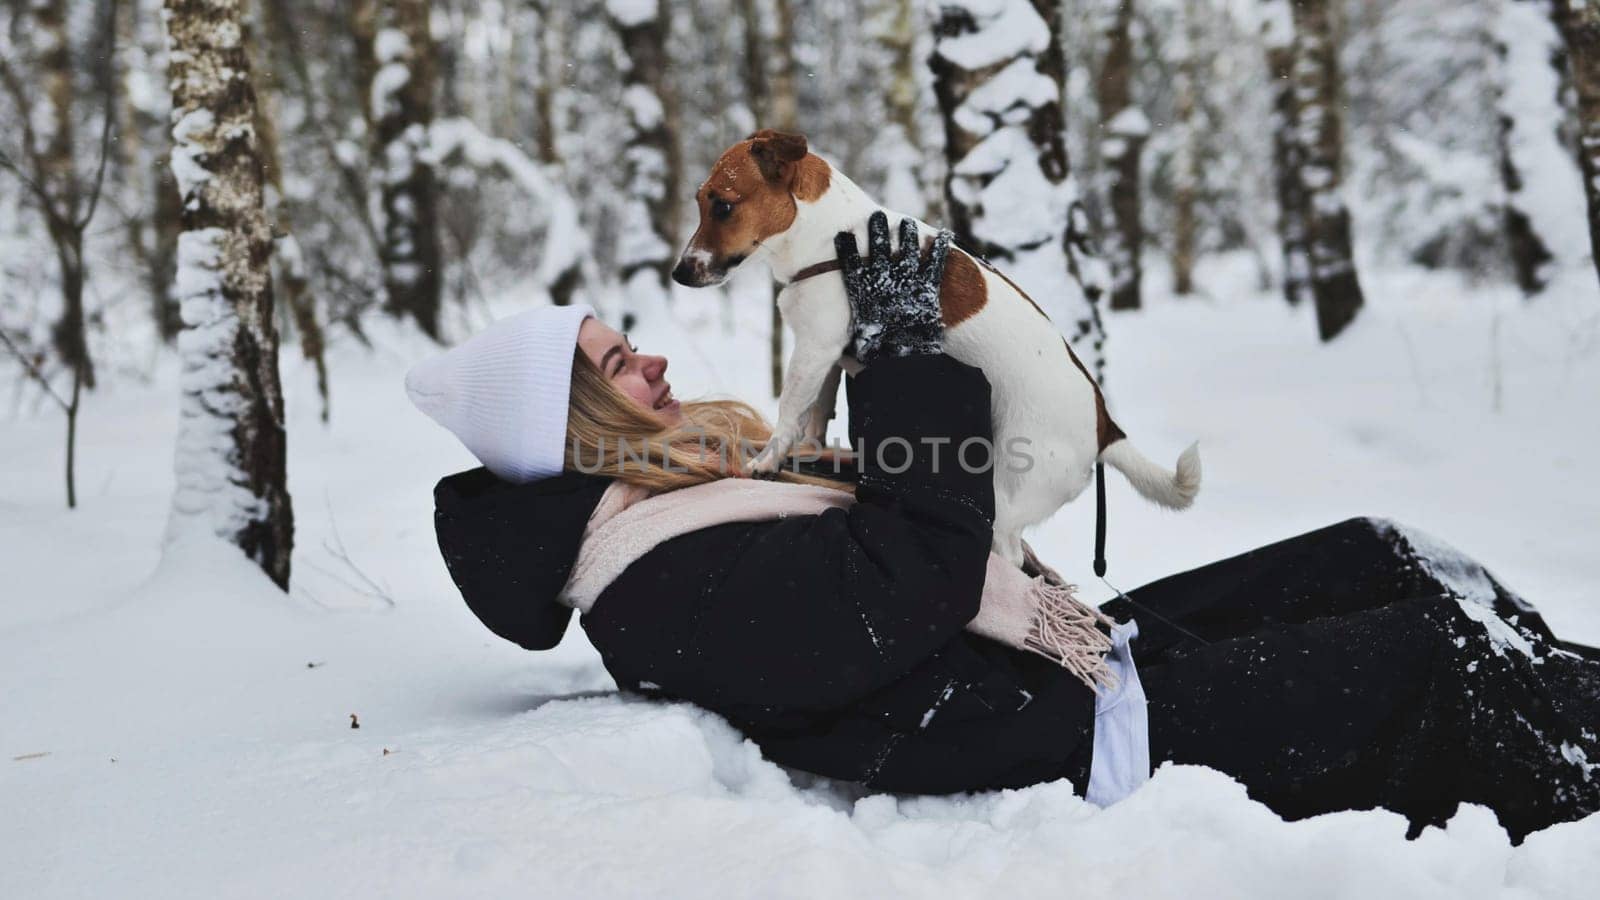 A girl falls in the snow with her Jack Russell Terrier dog in winter